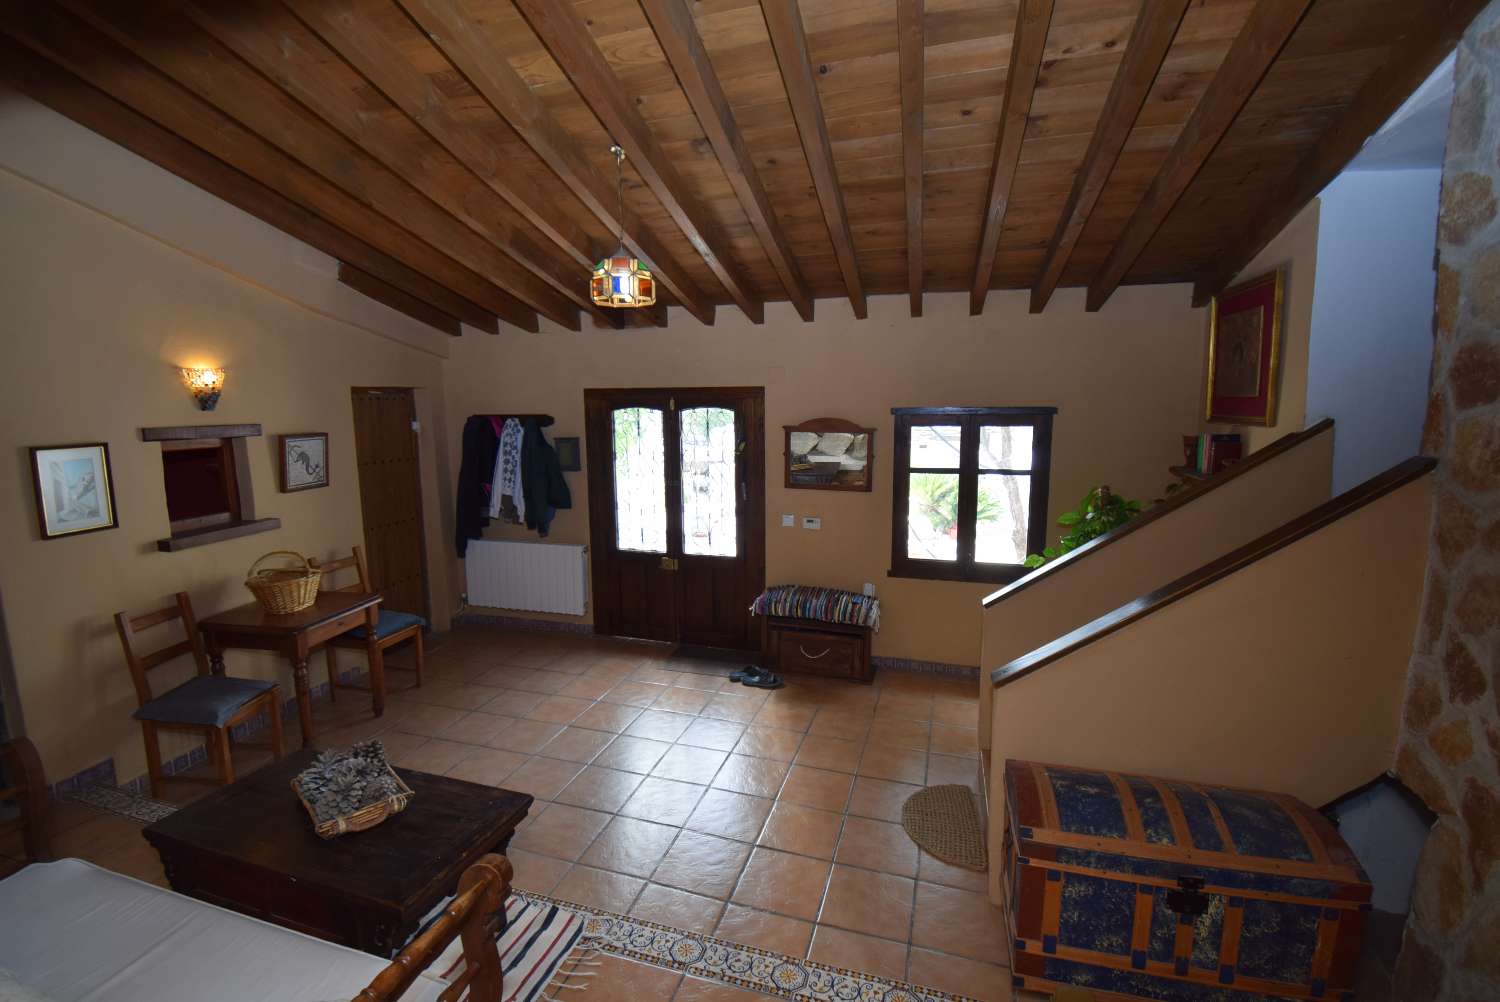 Beautiful rustic farmhouse, with 2 independent apartments, pool and great views